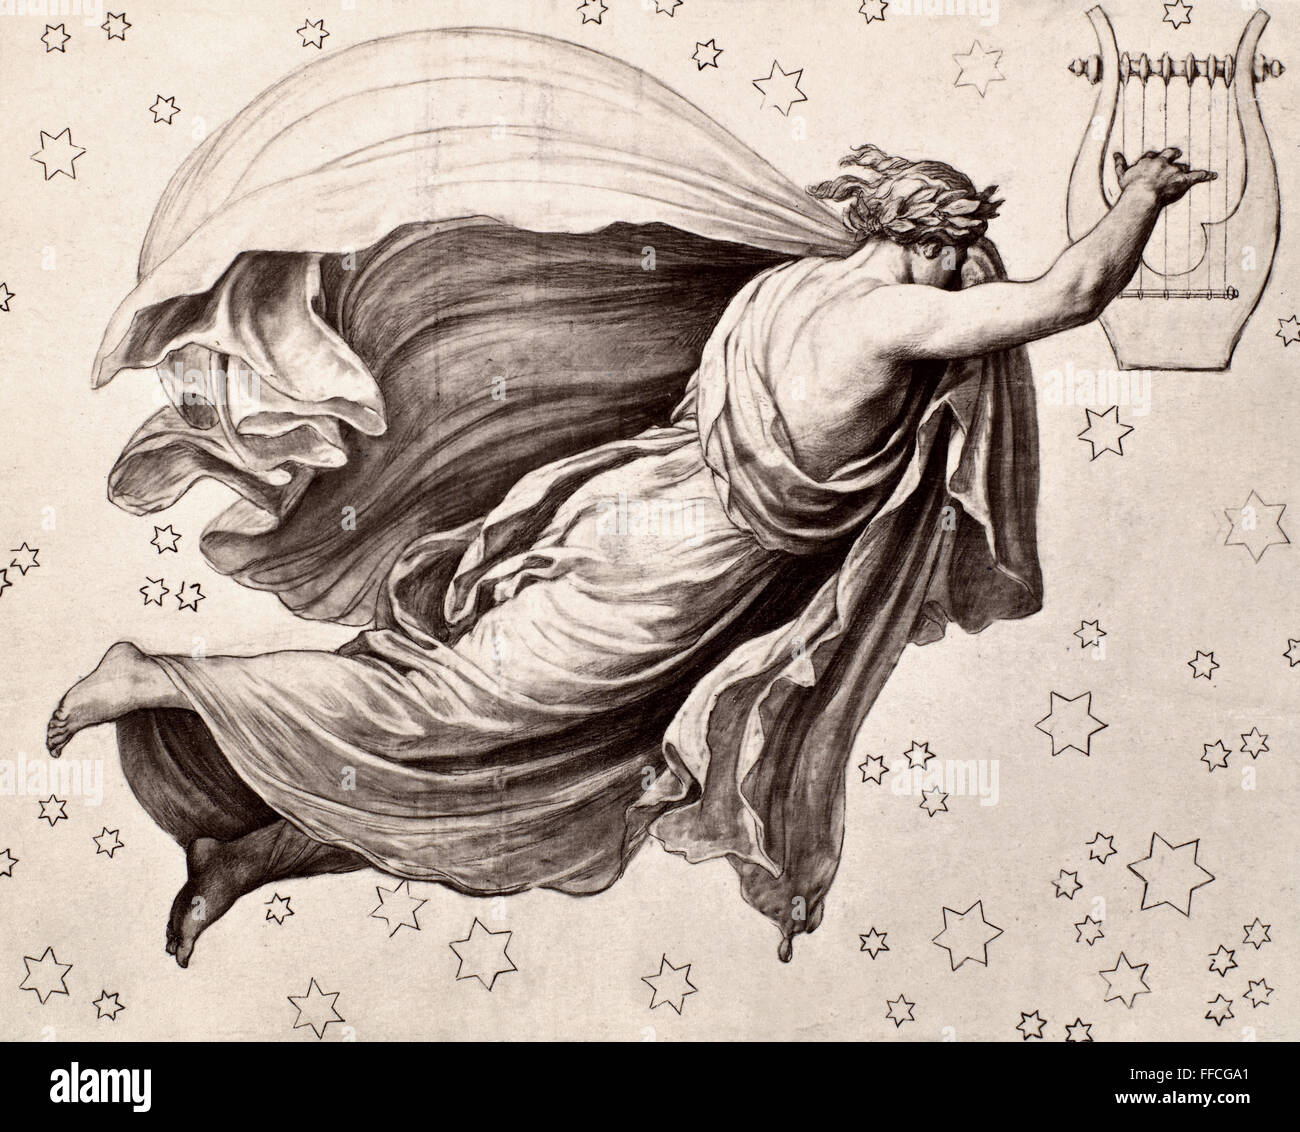 LYRE OF ORPHEUS. /nThe lyre of Orpheus placed among the stars. Drawing by Eduard von Engerth (1818-1897). Stock Photo